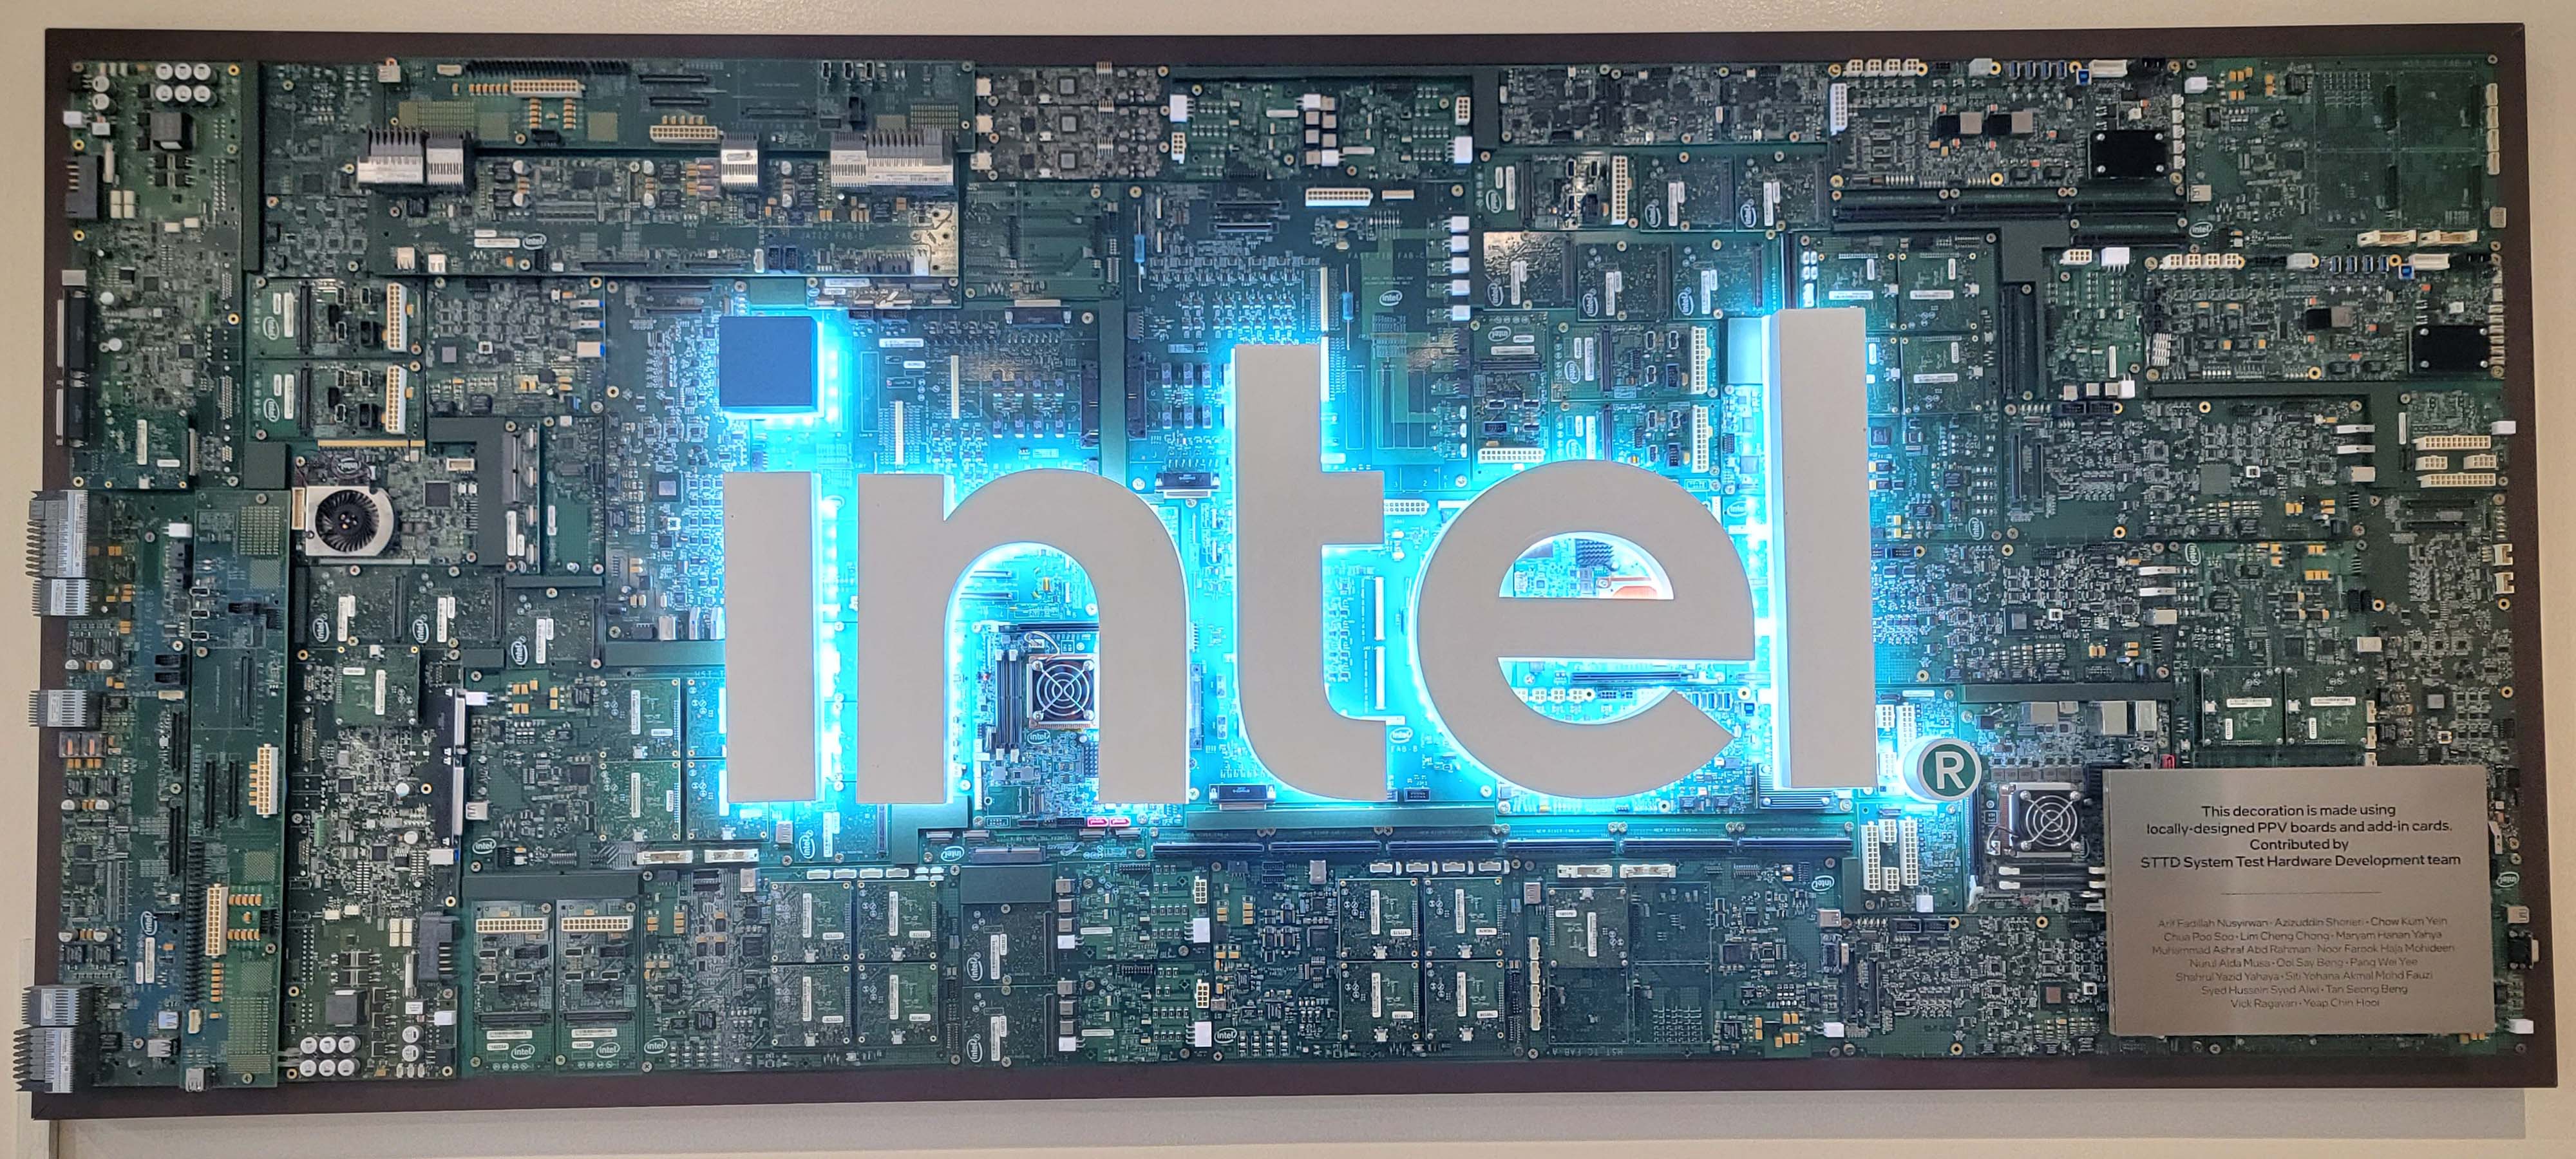 Intel shares Microsoft's new AI PC definition, launches AI PC Acceleration Programs and Core Ultra Meteor Lake NUC developer kits at AI conference